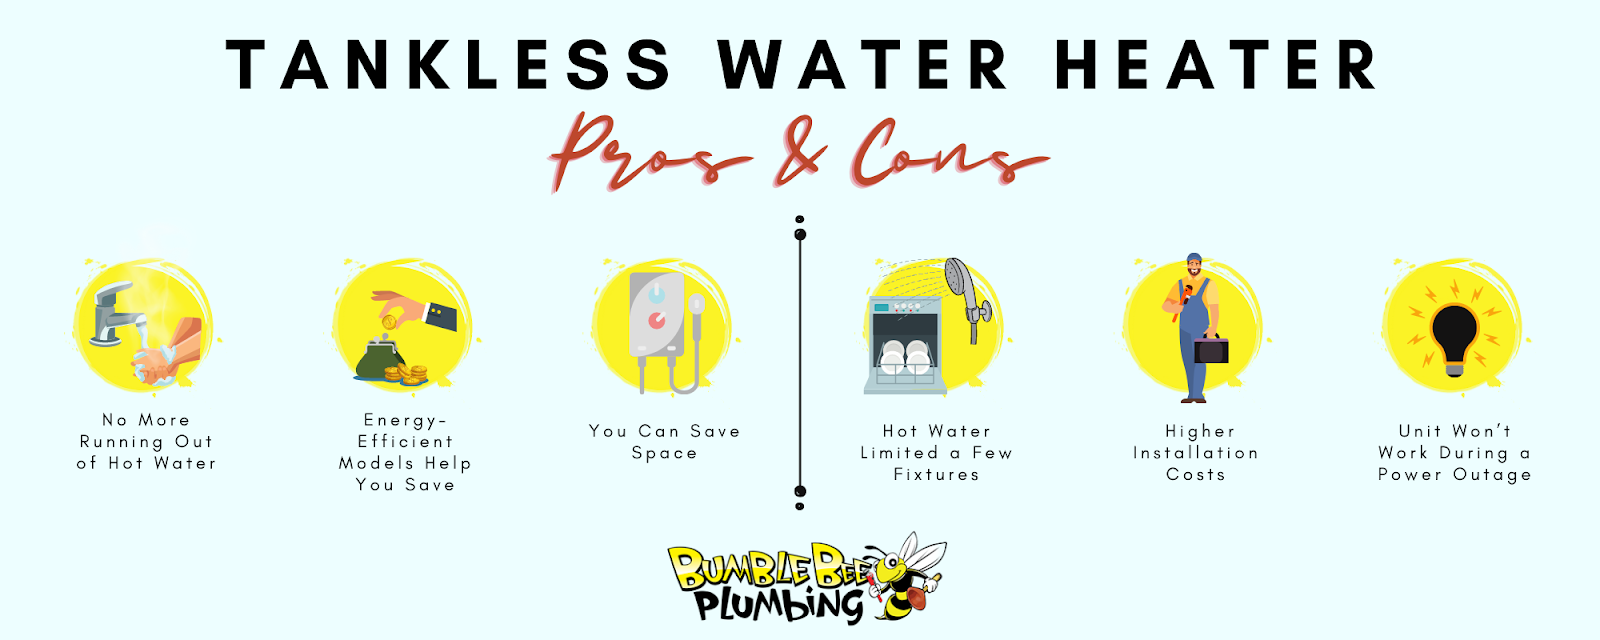 Pros & Cons of Tankless Water Heaters infographic